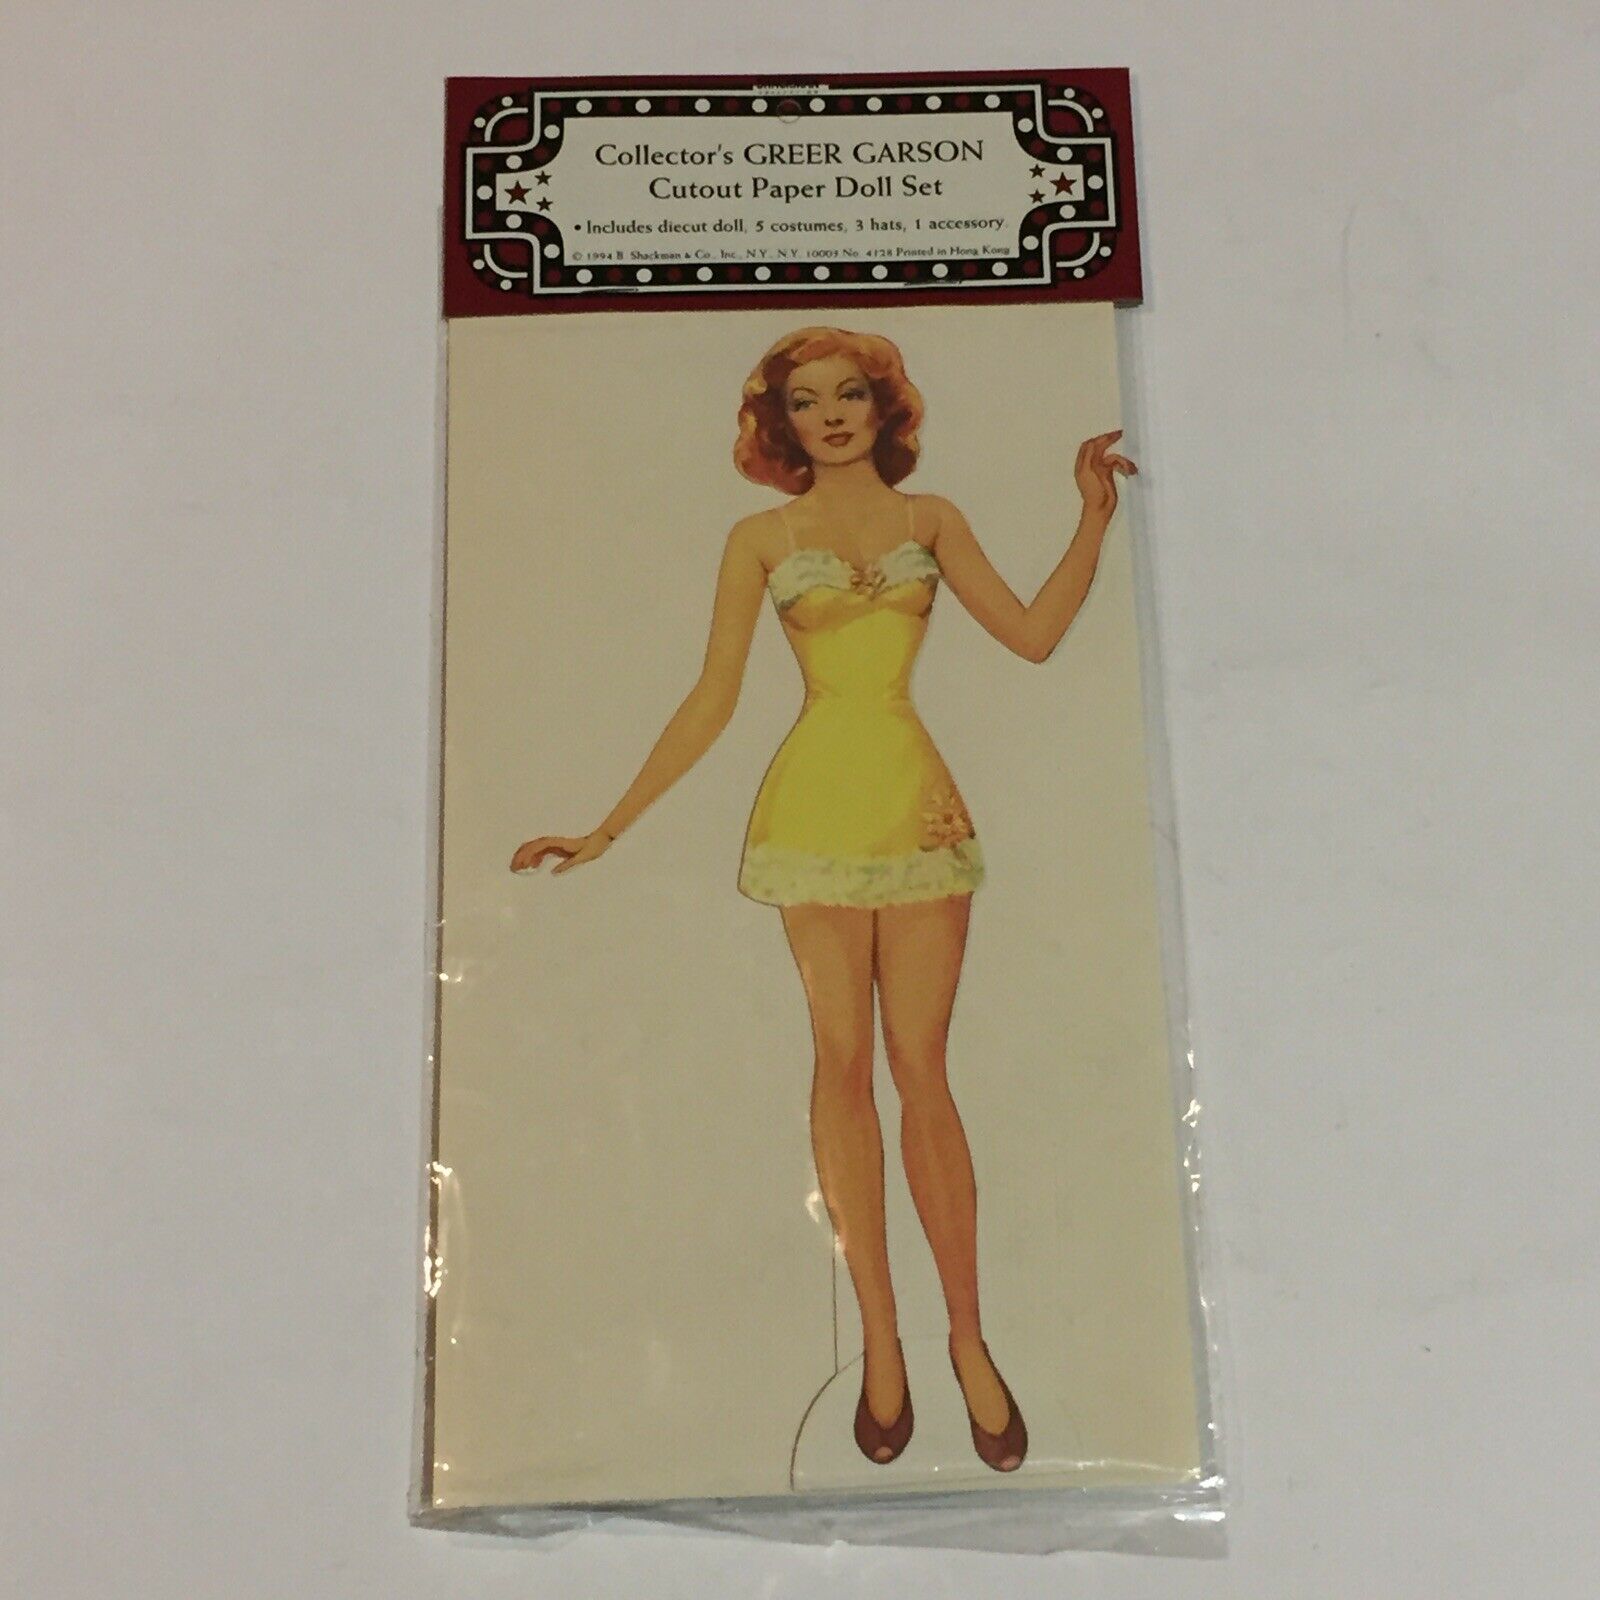 Collector's Greer Garson Cutout Paper Doll Set Sealed Never Opened